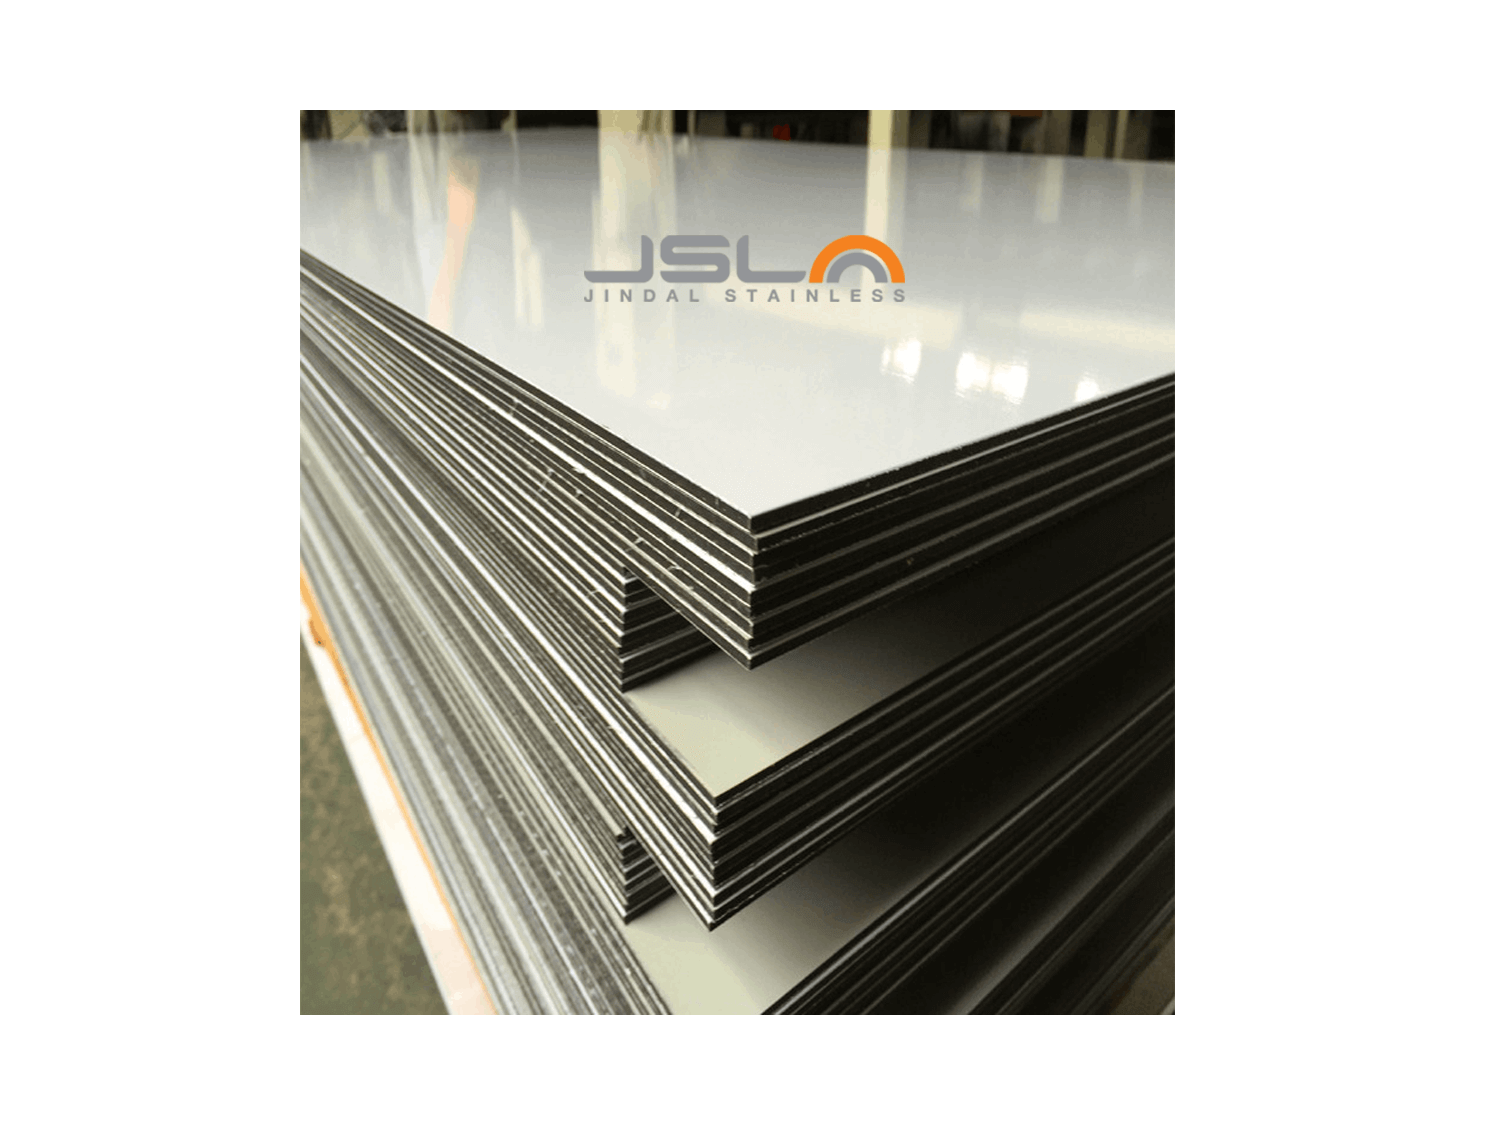 Authorized Dealer of Jindal Stainless Steel Sheet